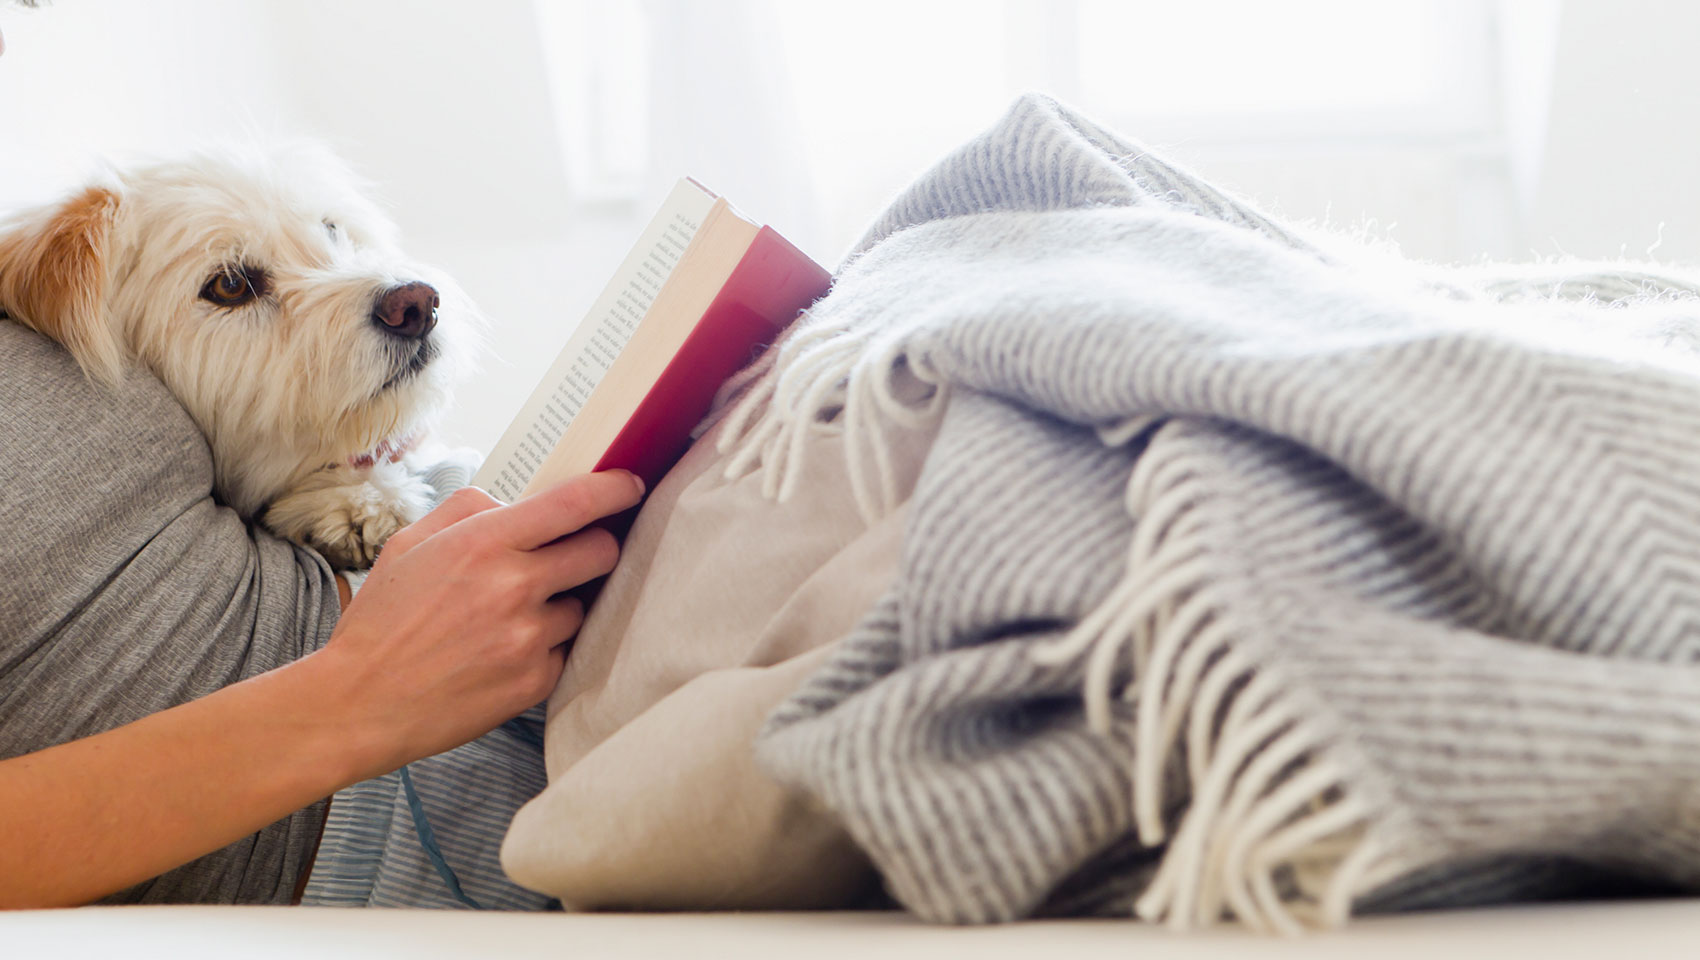 Dog on bed with person reading a book